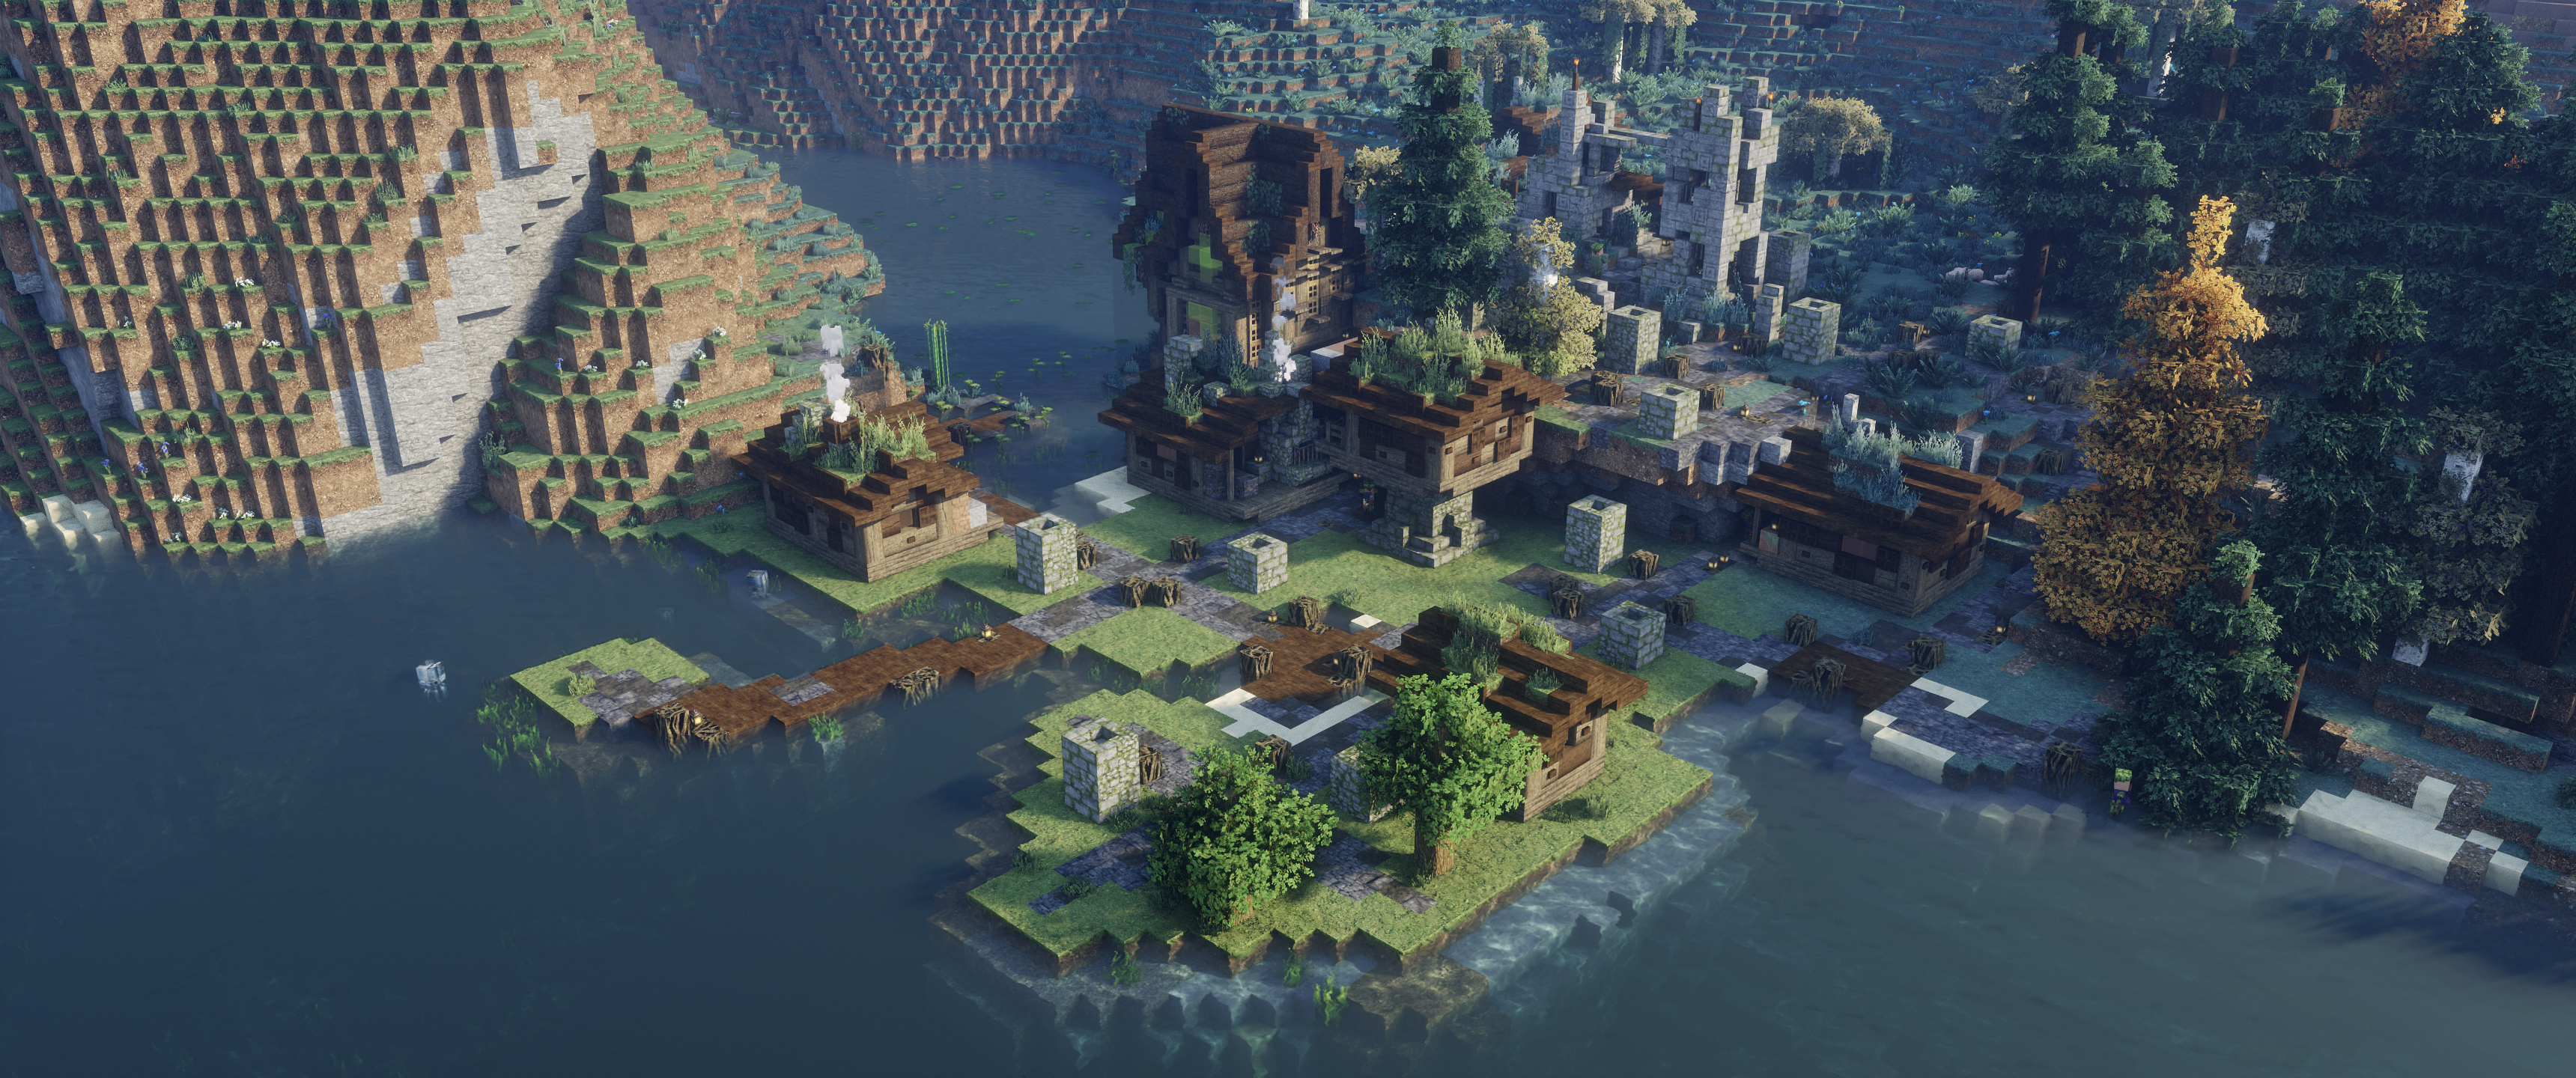 Minecraft Shaders Village River Video Games Video Game Landscape Mojang 3440x1440